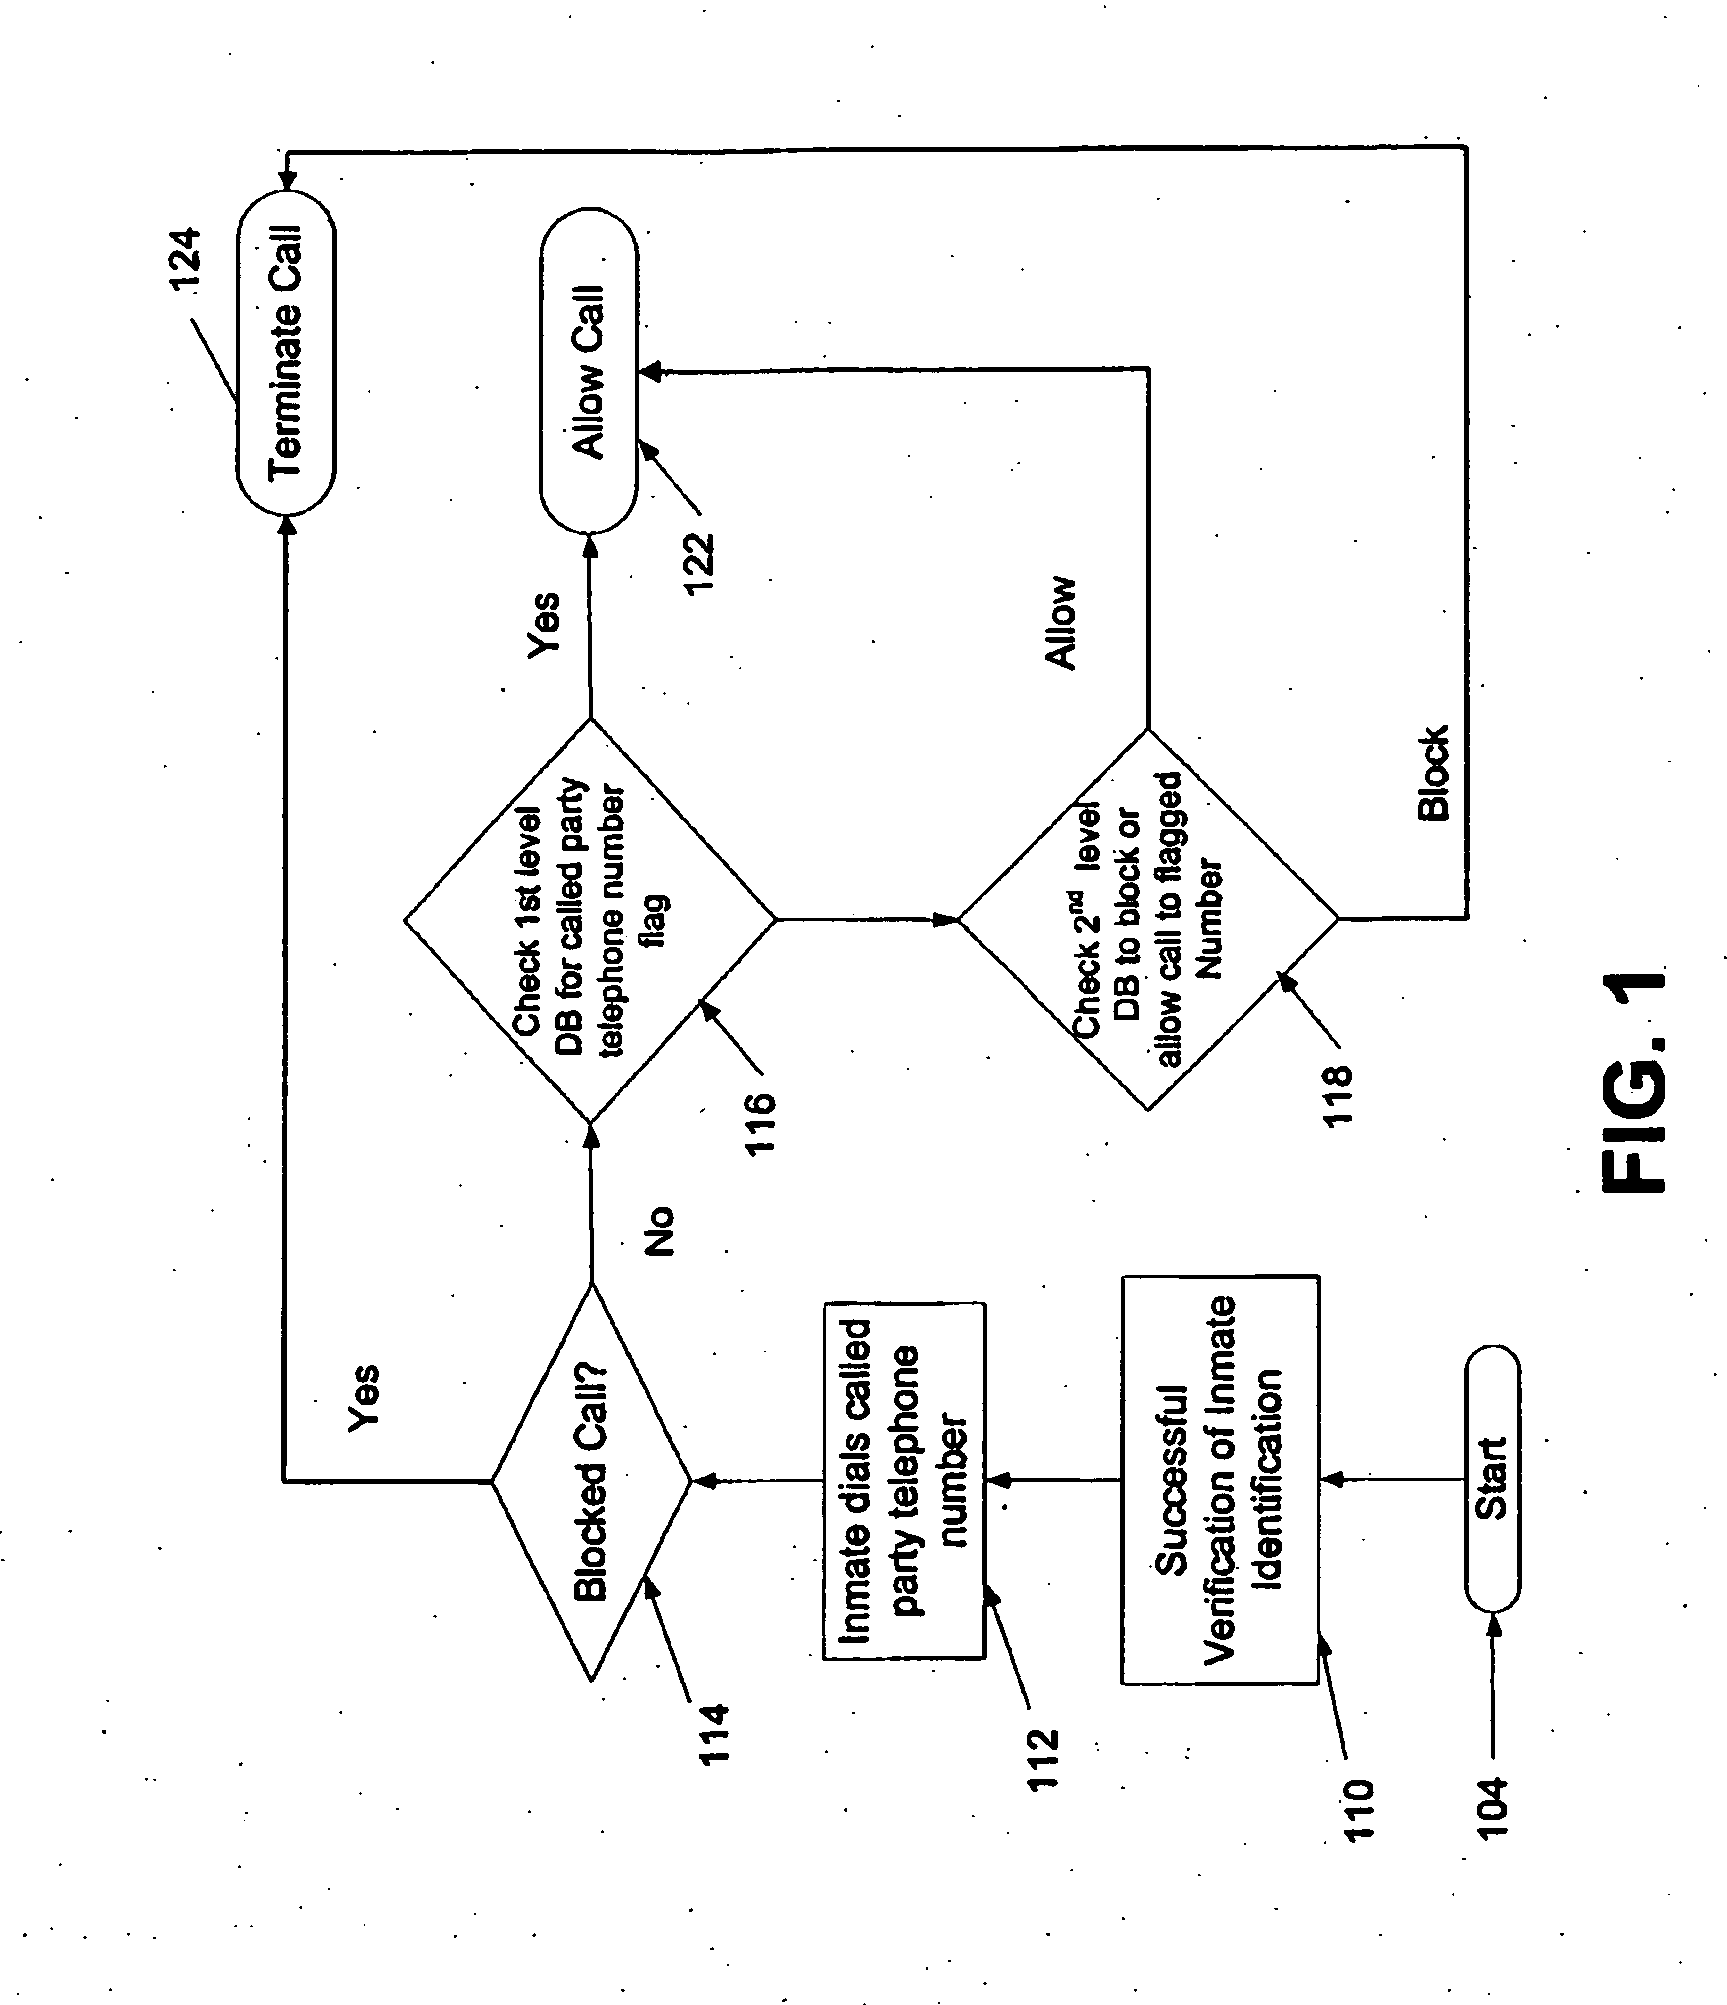 System and method for controlled call handling